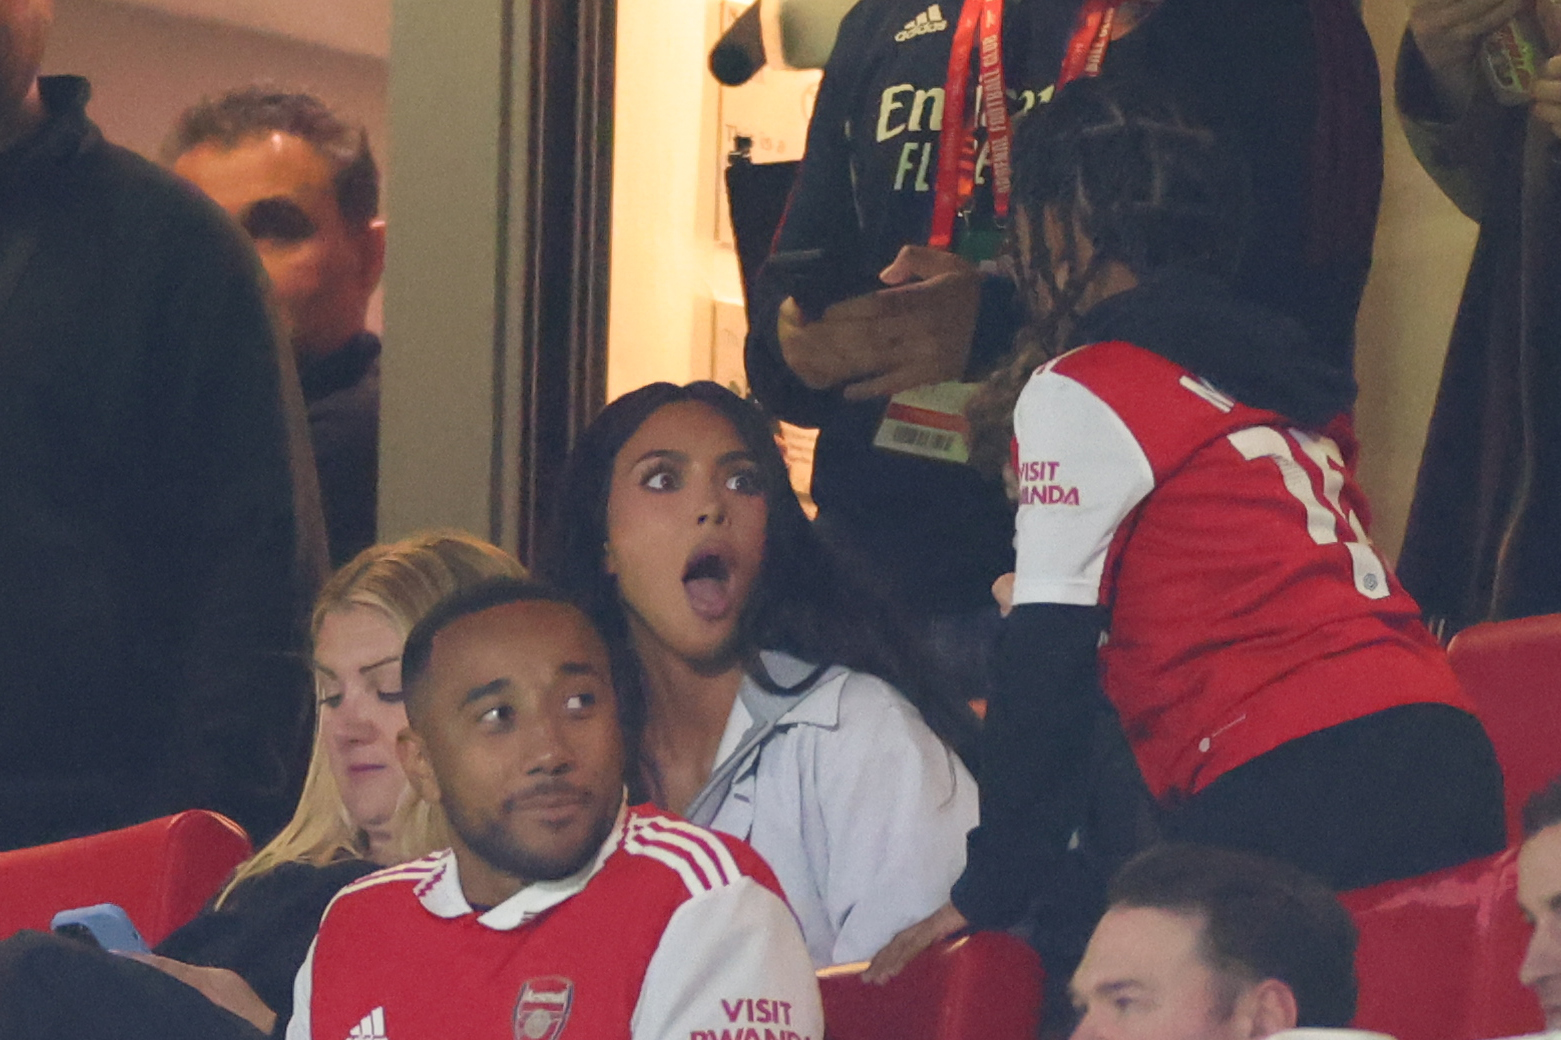 Kim K attended an Arsenal game in March